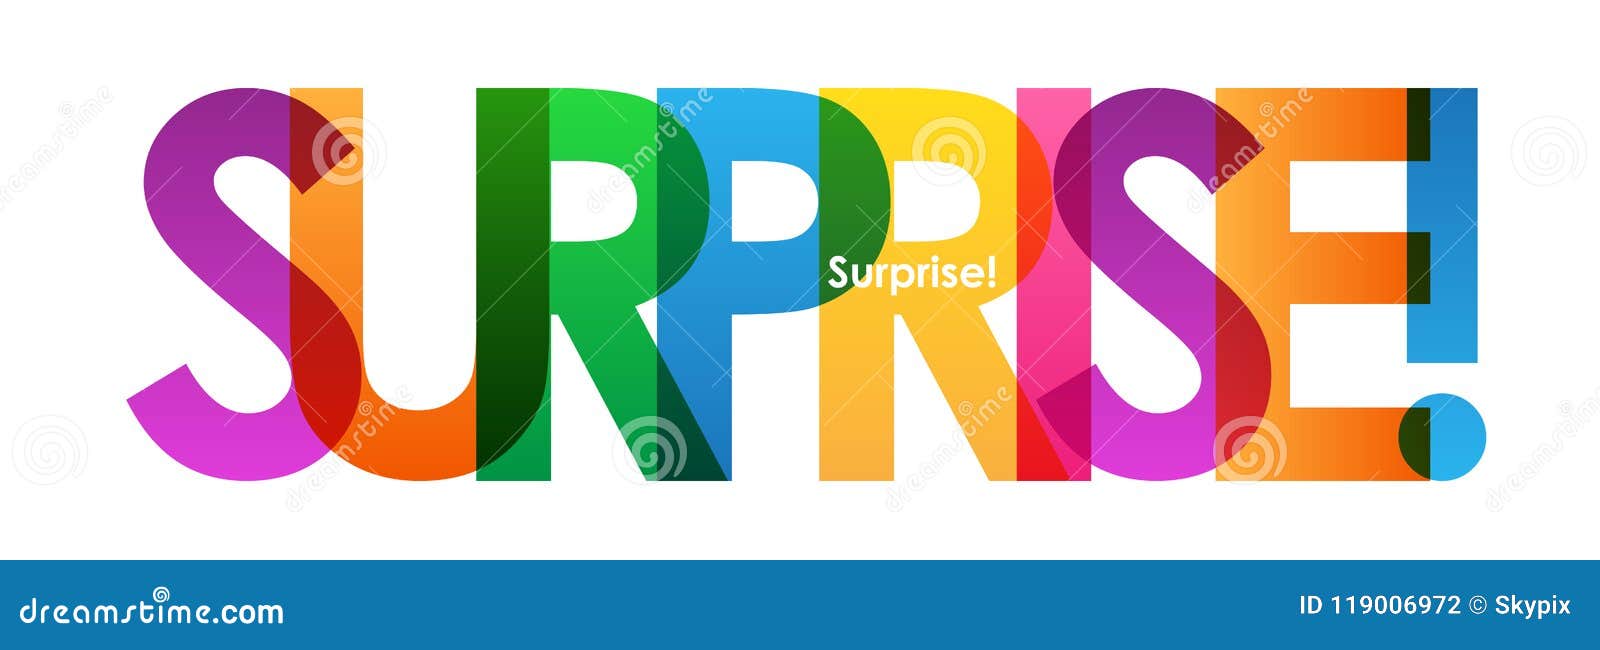 surprise! colorful overlapping letters  banner